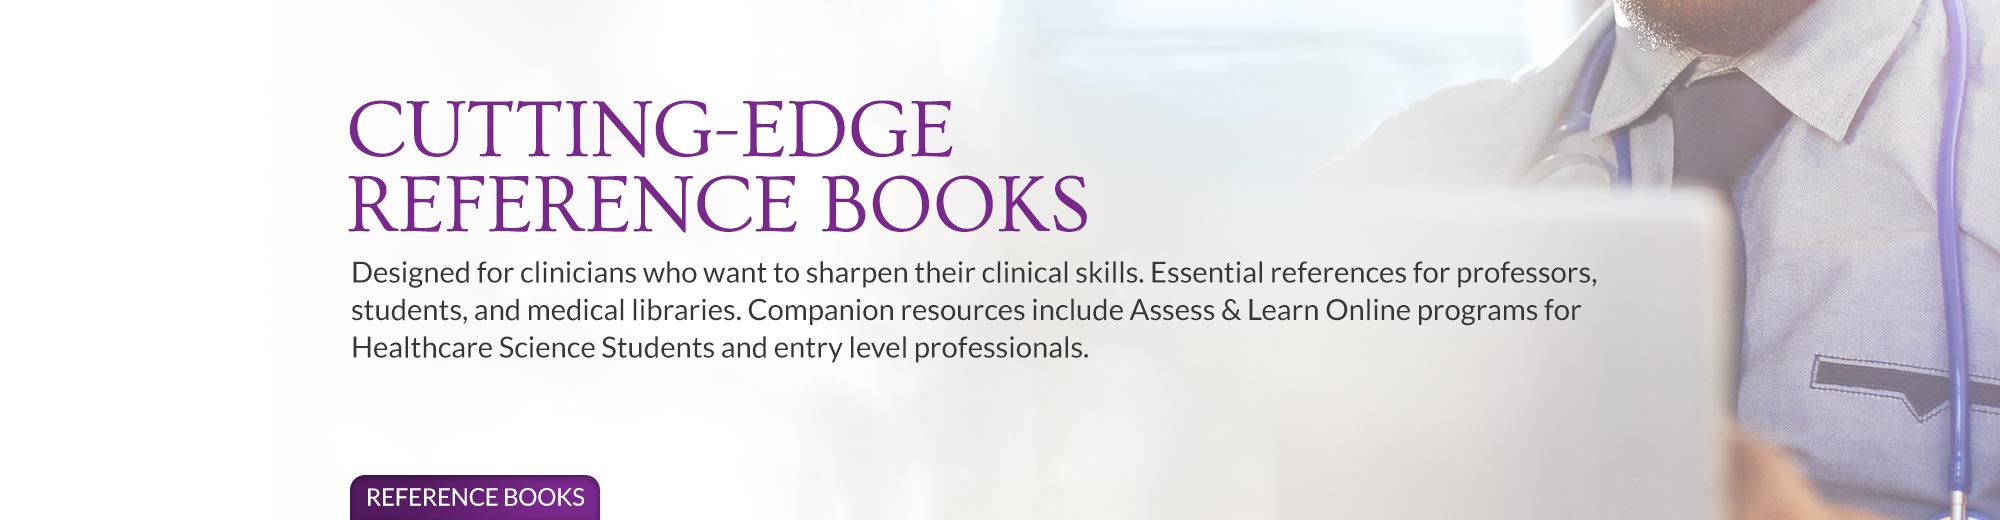 cutting edge reference books